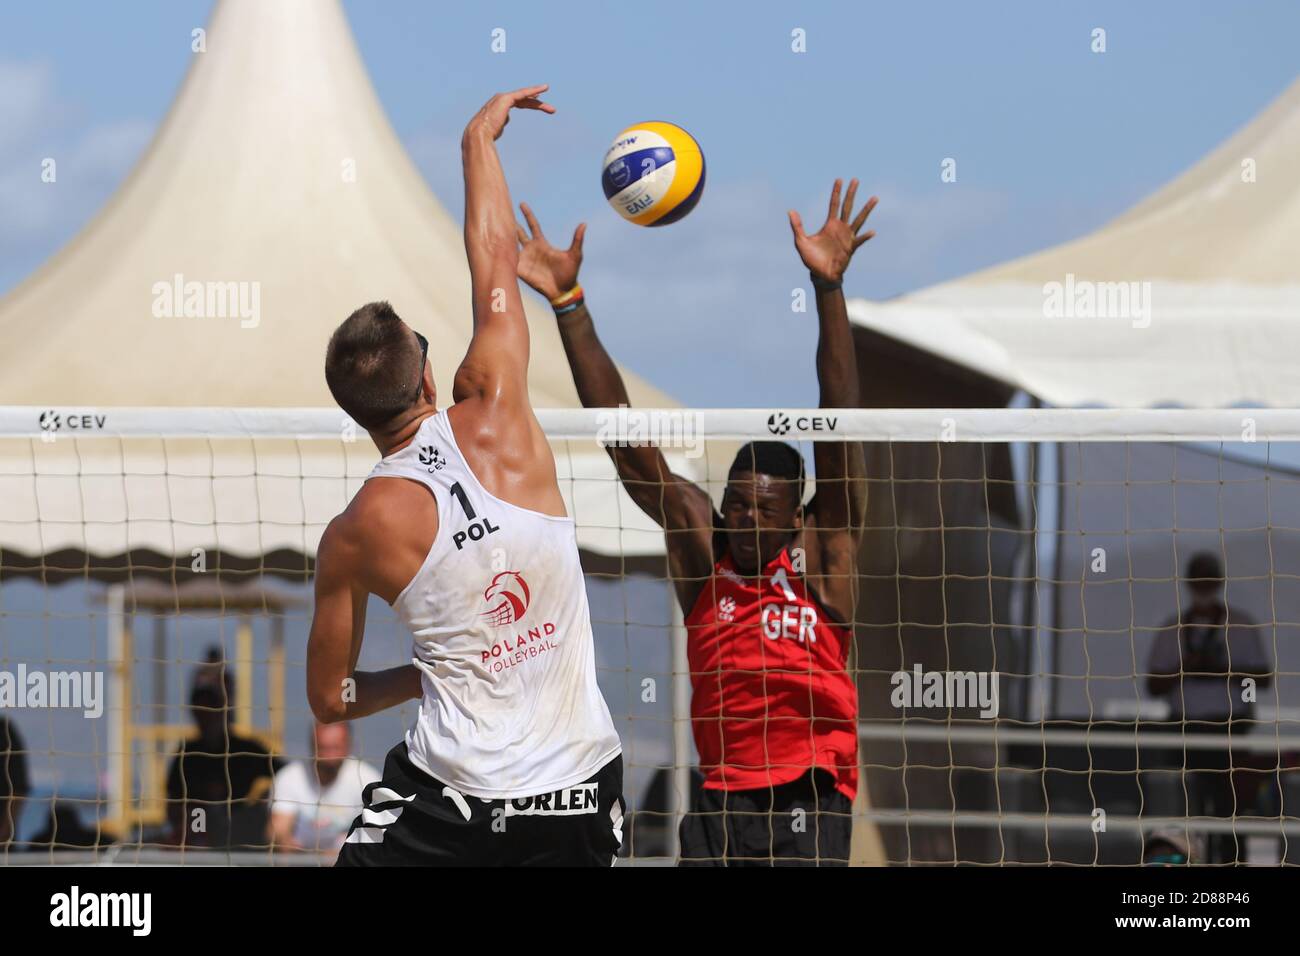 IZMIR, TURKEY - SEPTEMBER 27, 2020: Undefined athletes of German and Polish teams during semifinal match of U22 Beach Volleyball European Championship Stock Photo